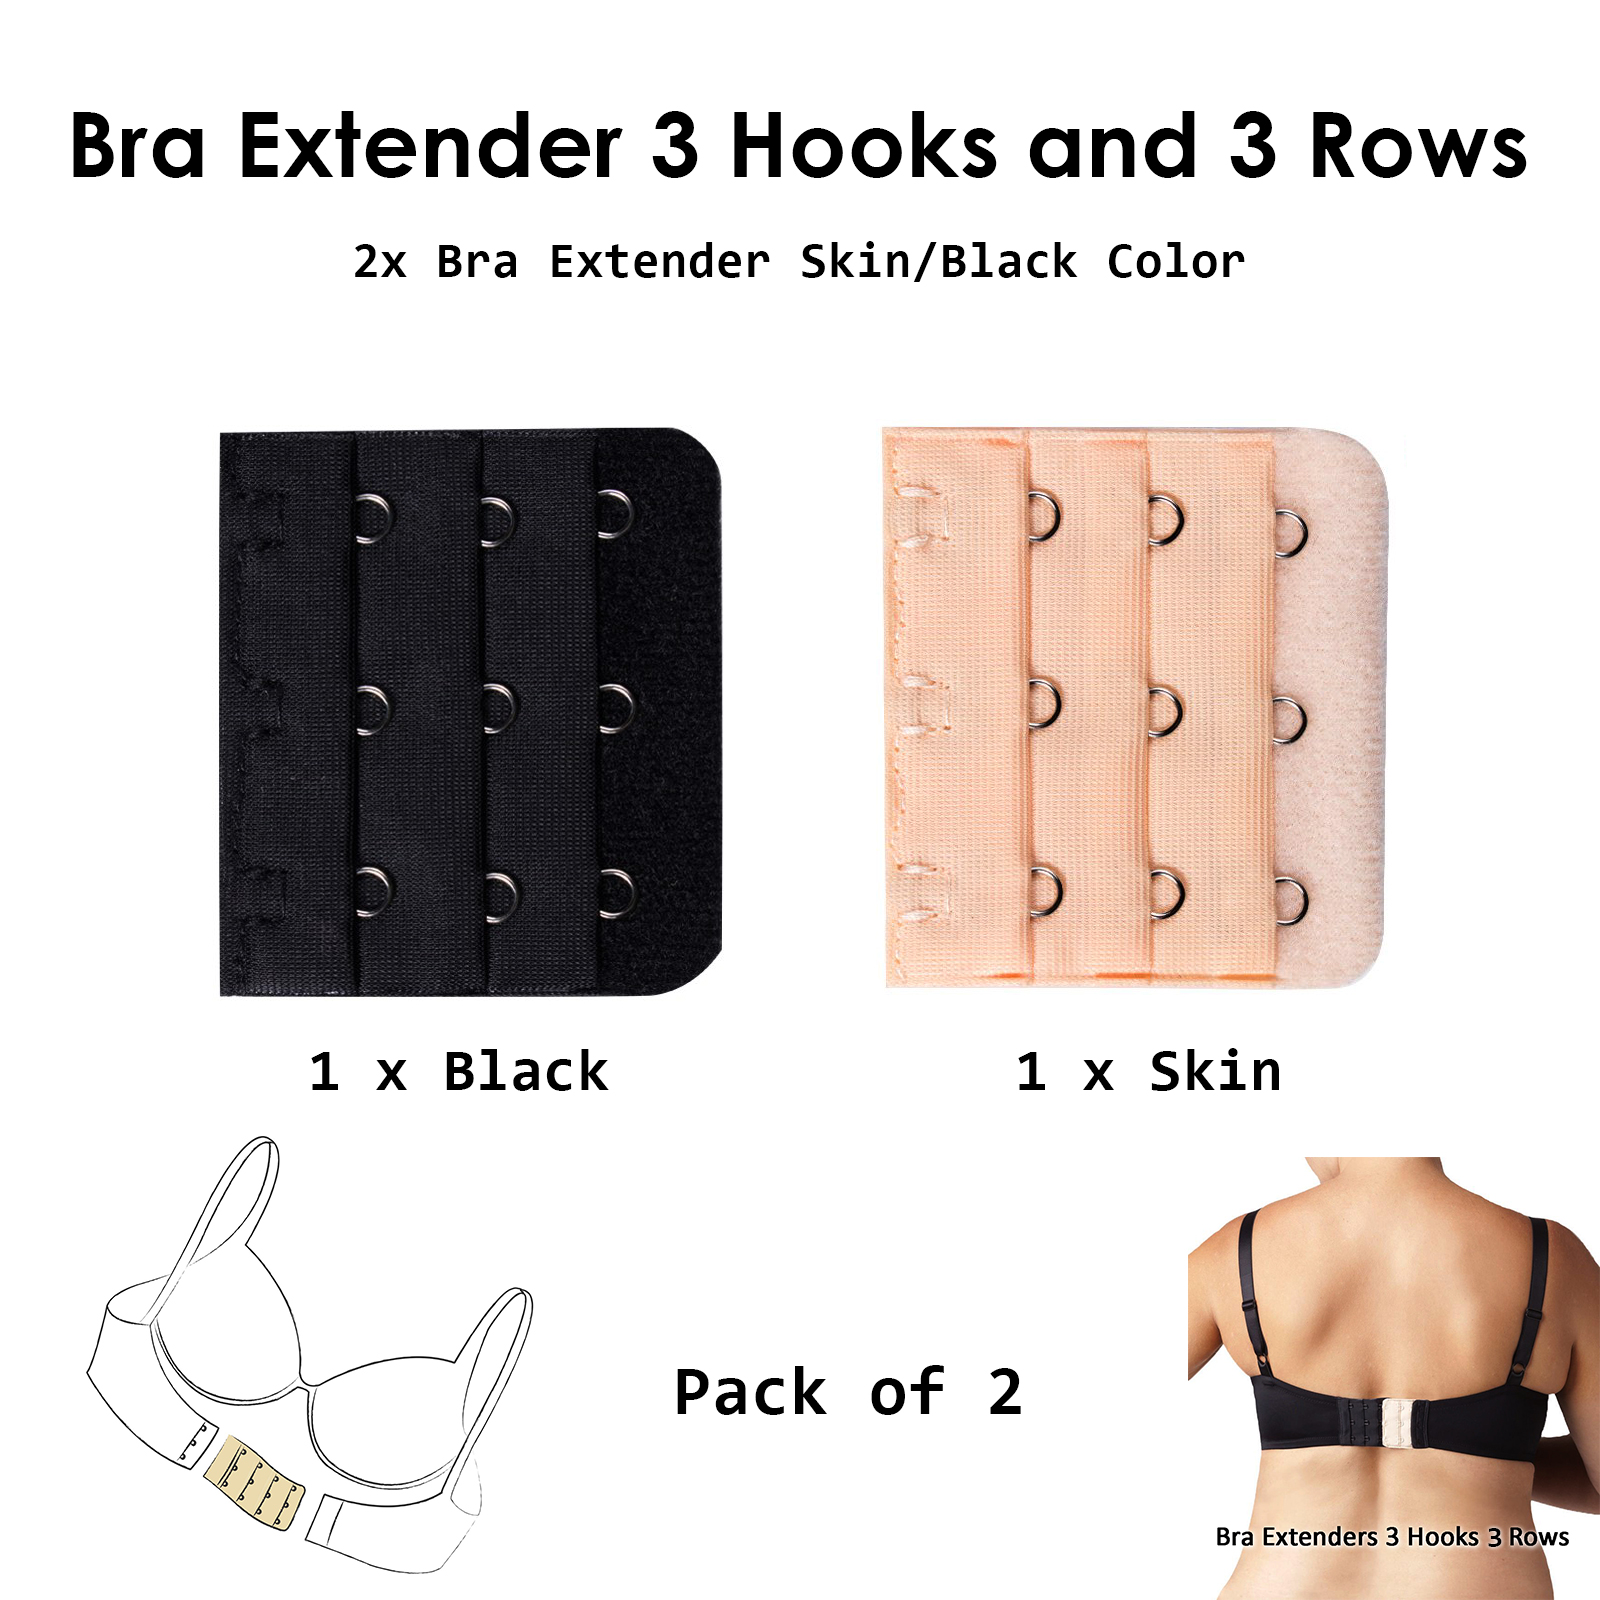 Pack of Two 3-Hooks 3-Rows Adjustable Belt Buckle Hot Multi Color Available  Ladies Useful Bra Extenders Strap Extension in Black and Skin